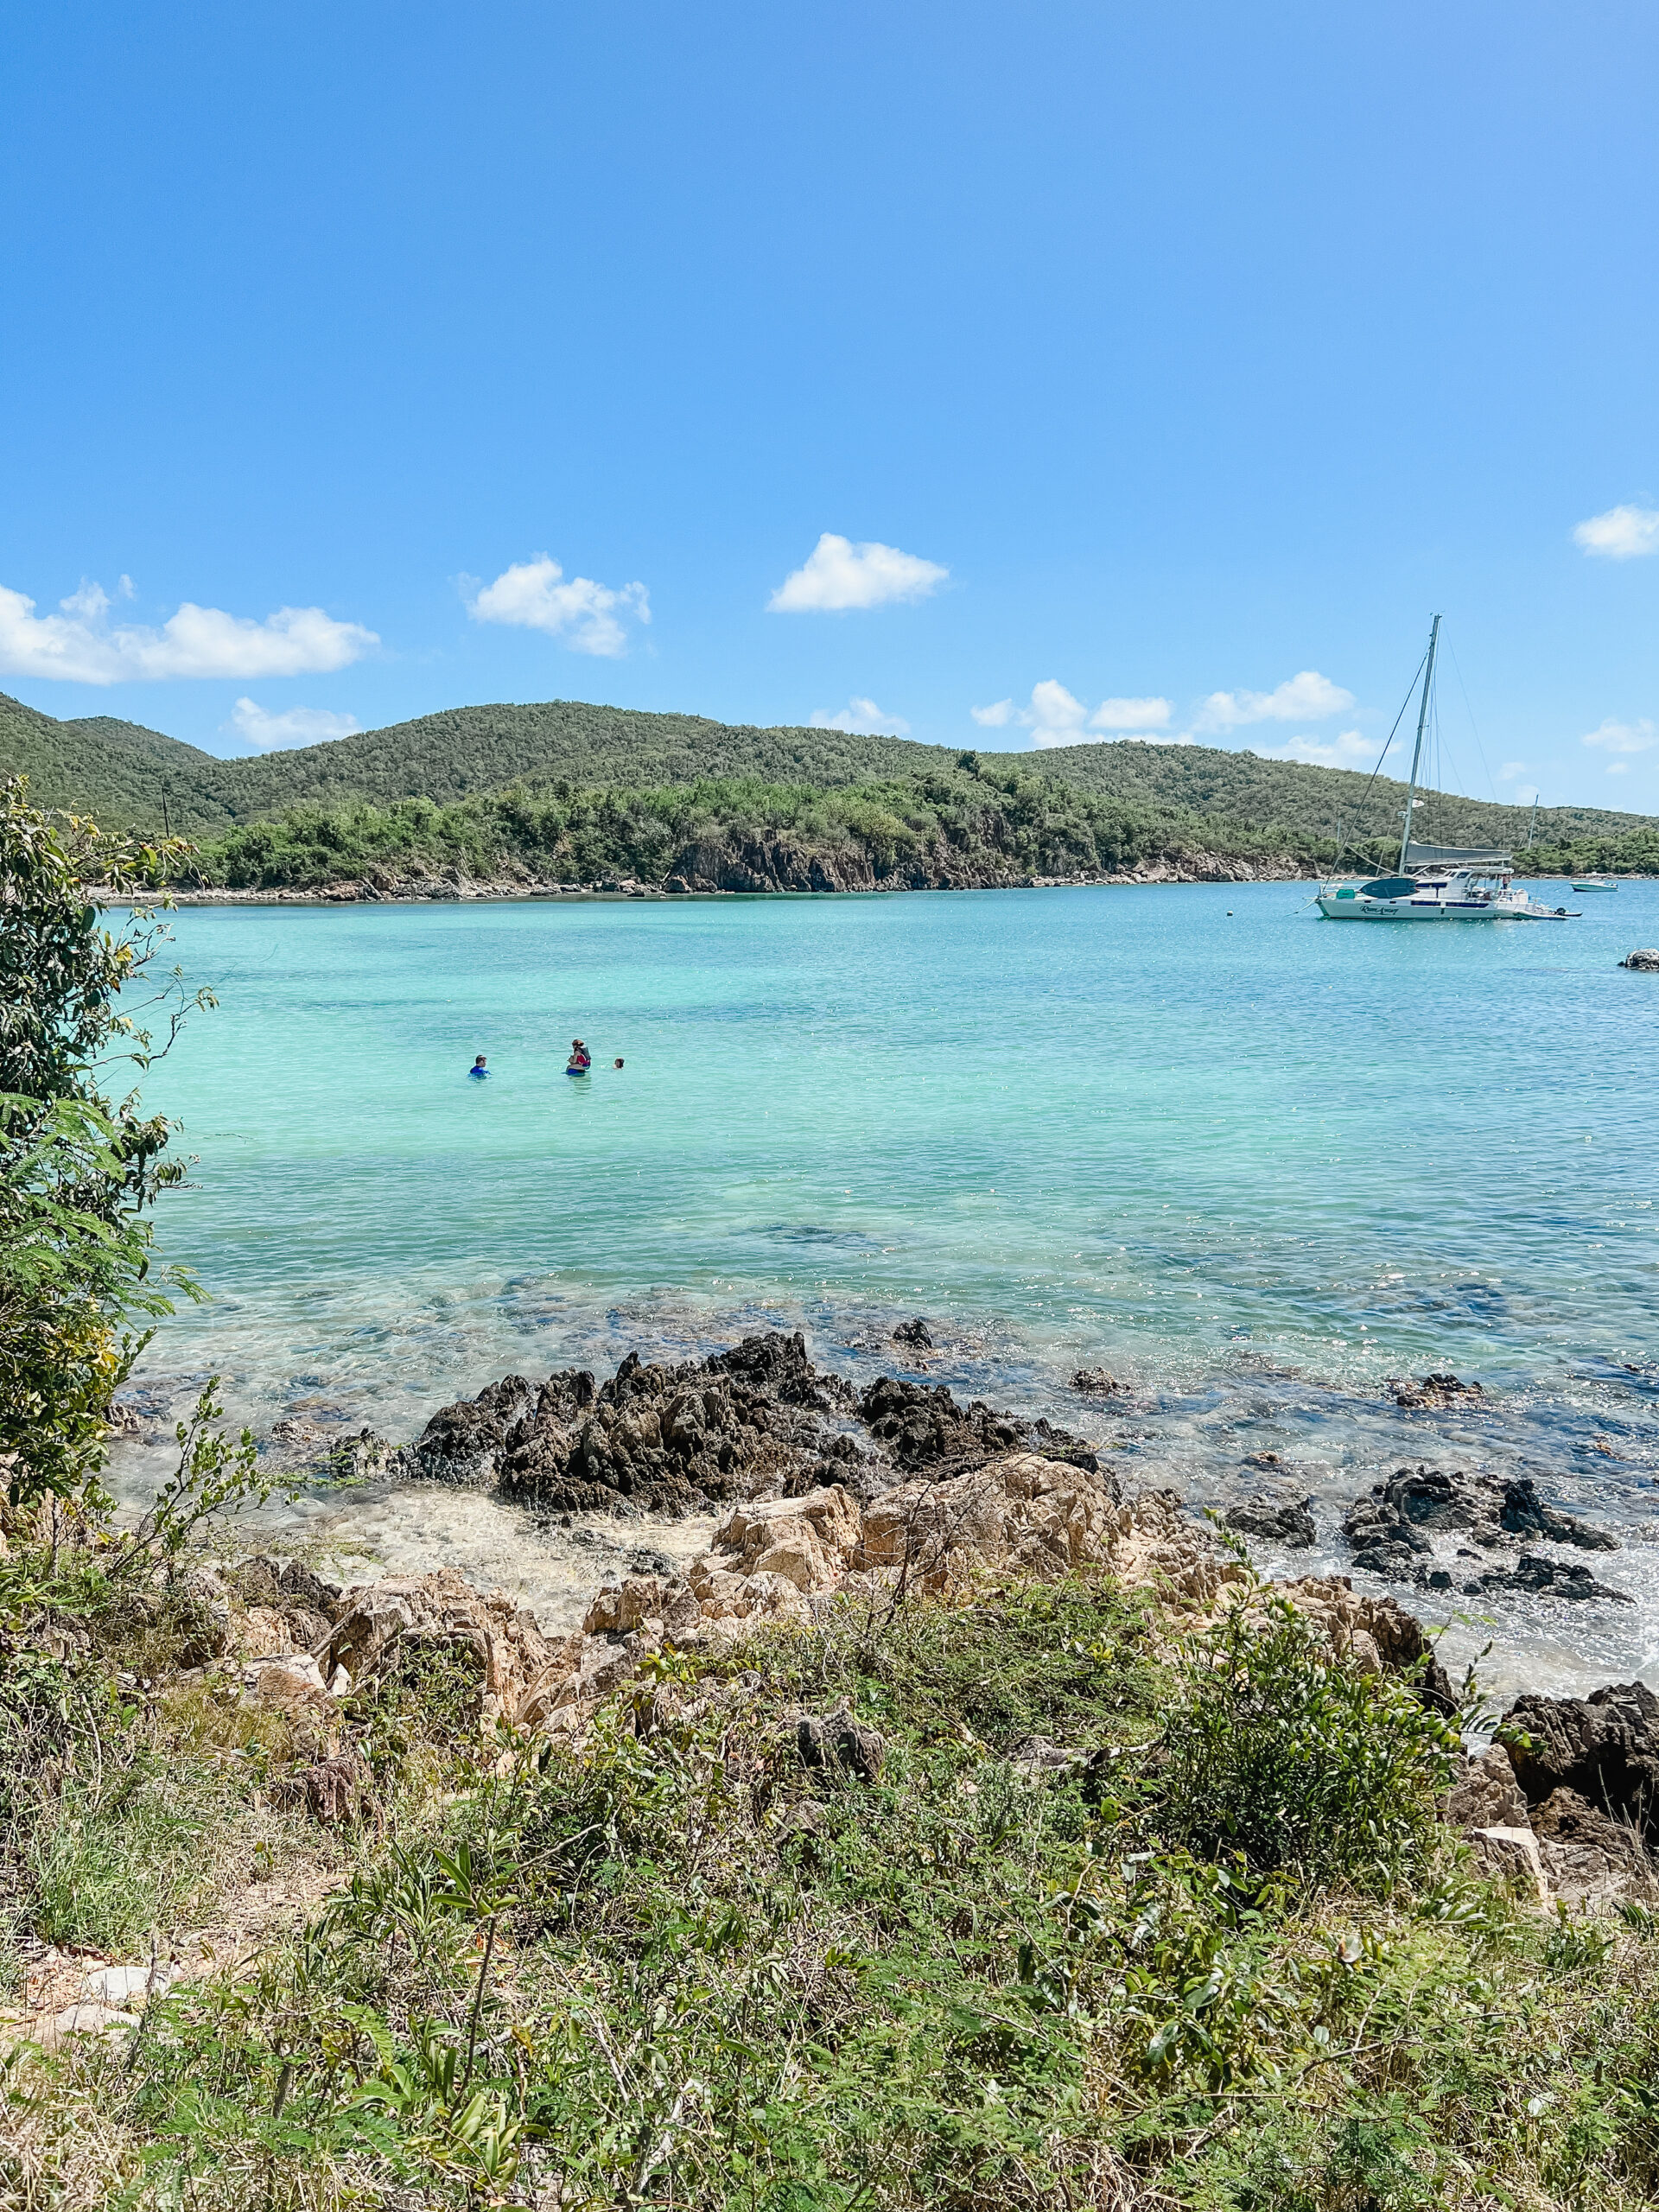 Connecticut life and style blogger Lauren McBride shares her experience in Coral Bay, St. John USVI including beaches and restaurants.